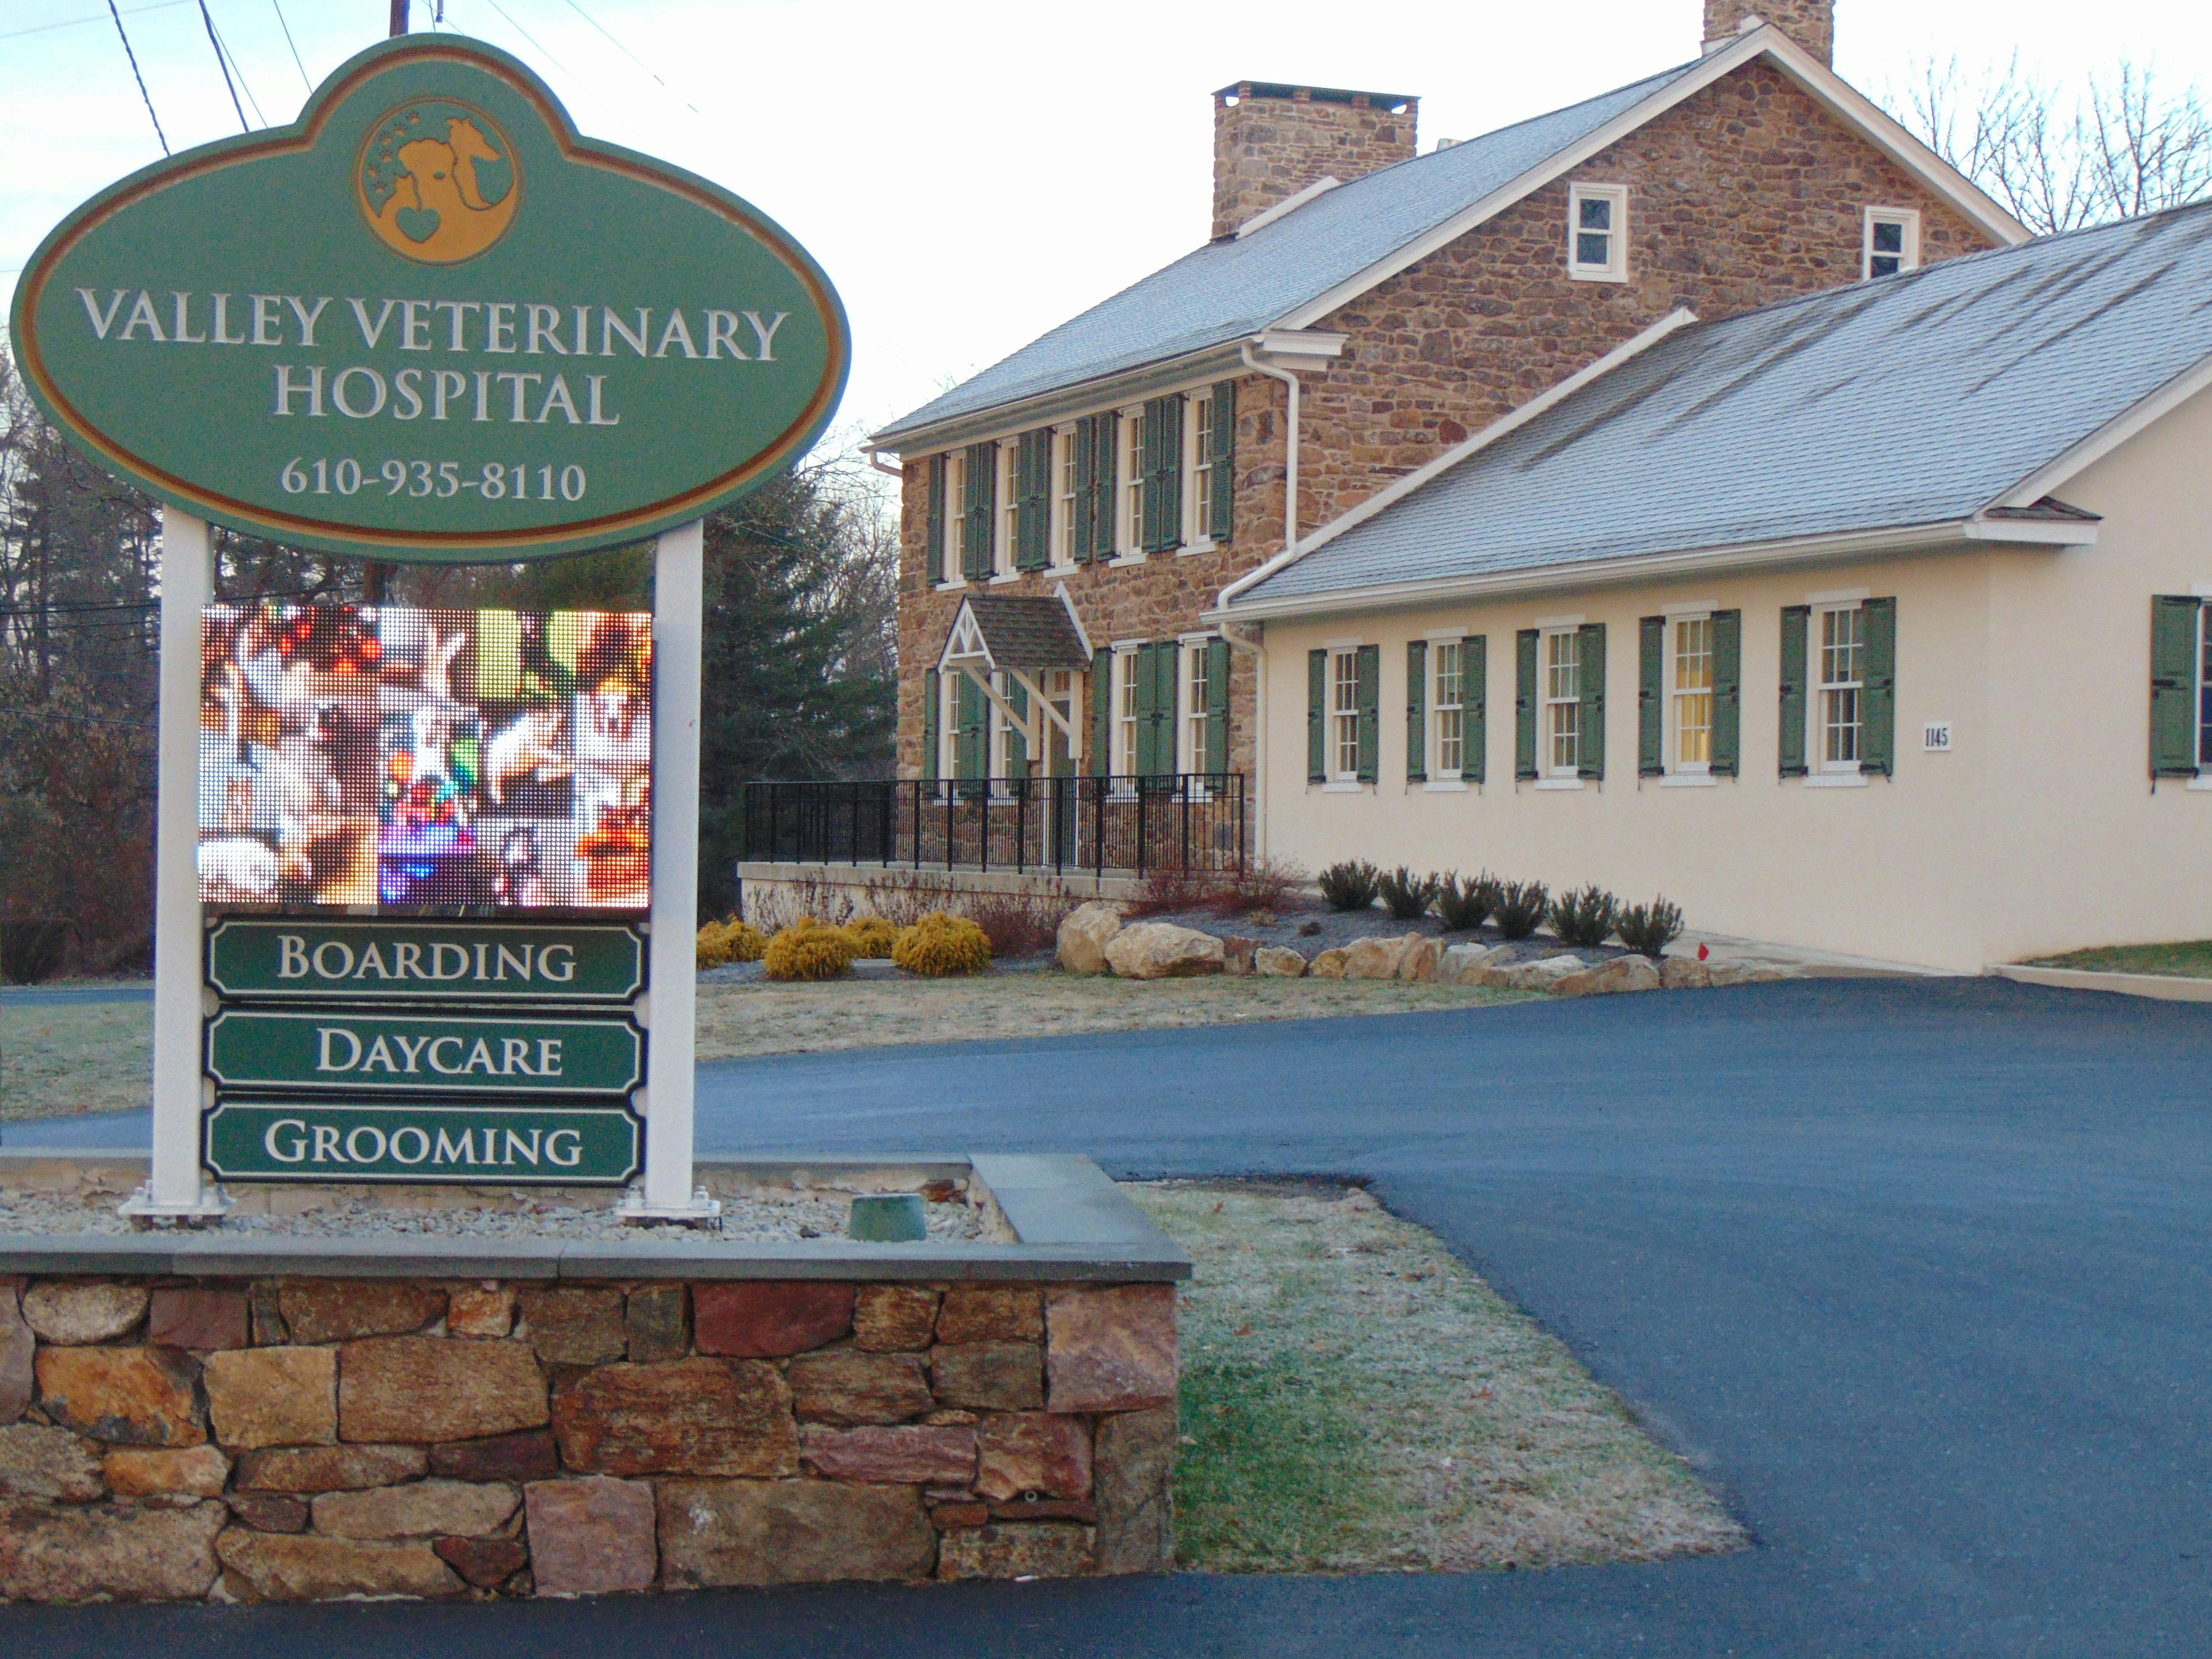 Convert an existing building into a veterinary hospital